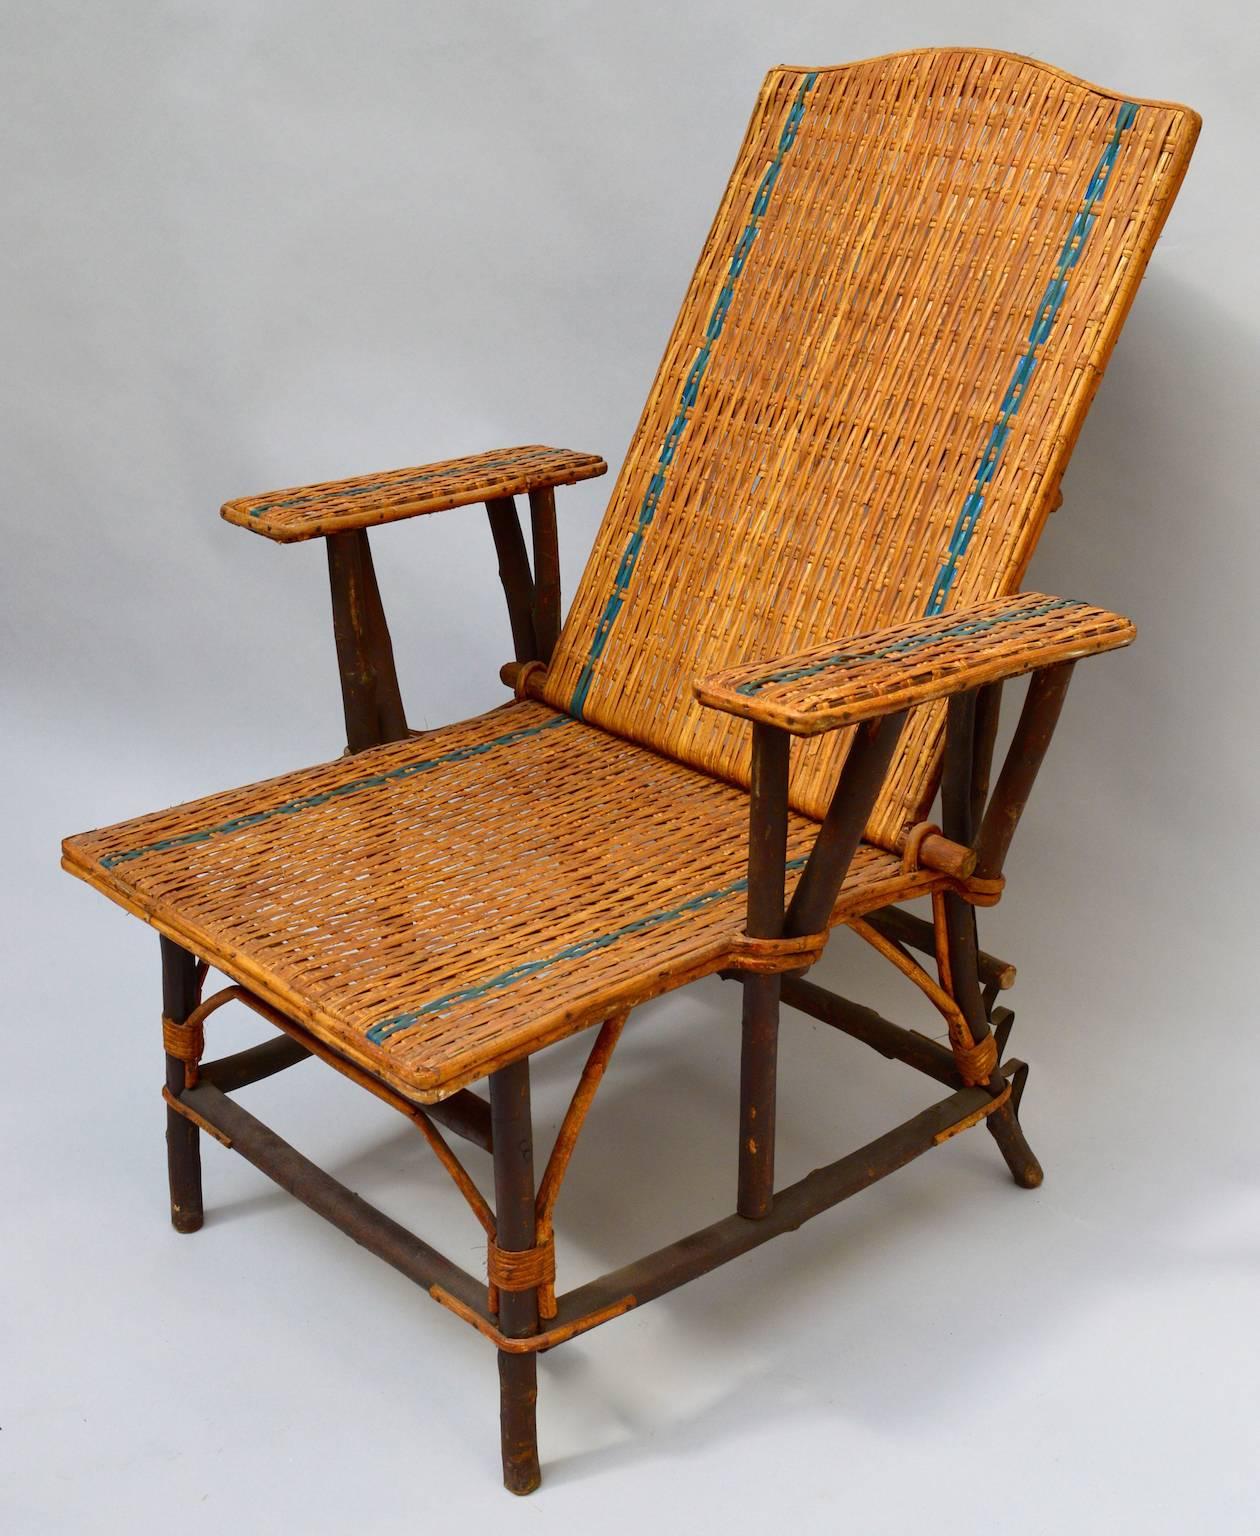 Art Deco Vintage French Woven Rattan Wicker Lounge Chair